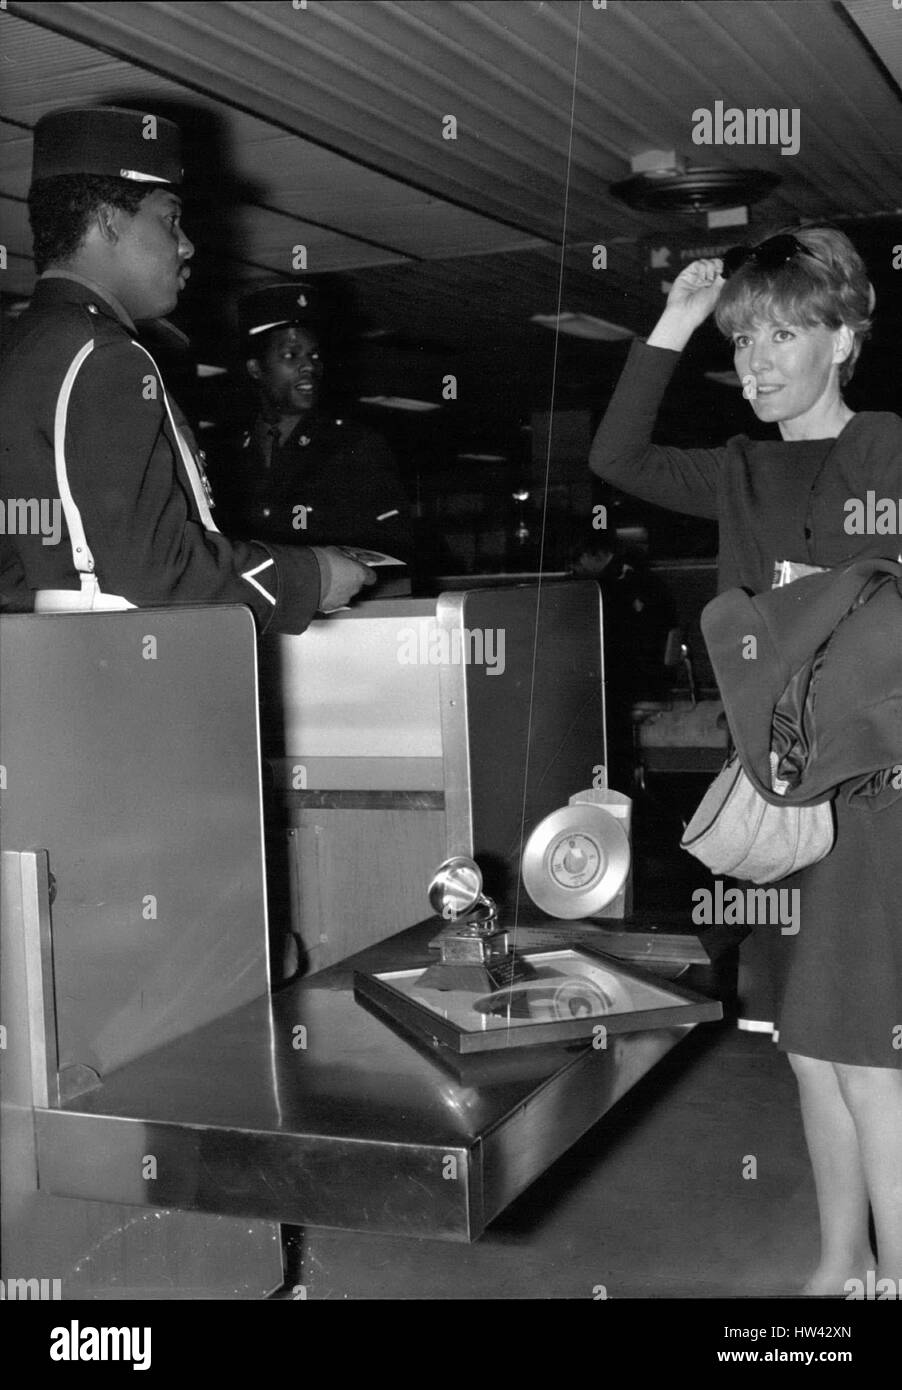 May 19, 1965 - Petula Clark back from America:Petula Clark pictured at Orly Airport as she was displaying her Trophies received during her tour to two coloured customs officials at Orly Airfield this morning will she or will she not pay duty on them? (Credit Image: © Keystone Press Agency/Keystone USA via ZUMAPRESS.com) Stock Photo